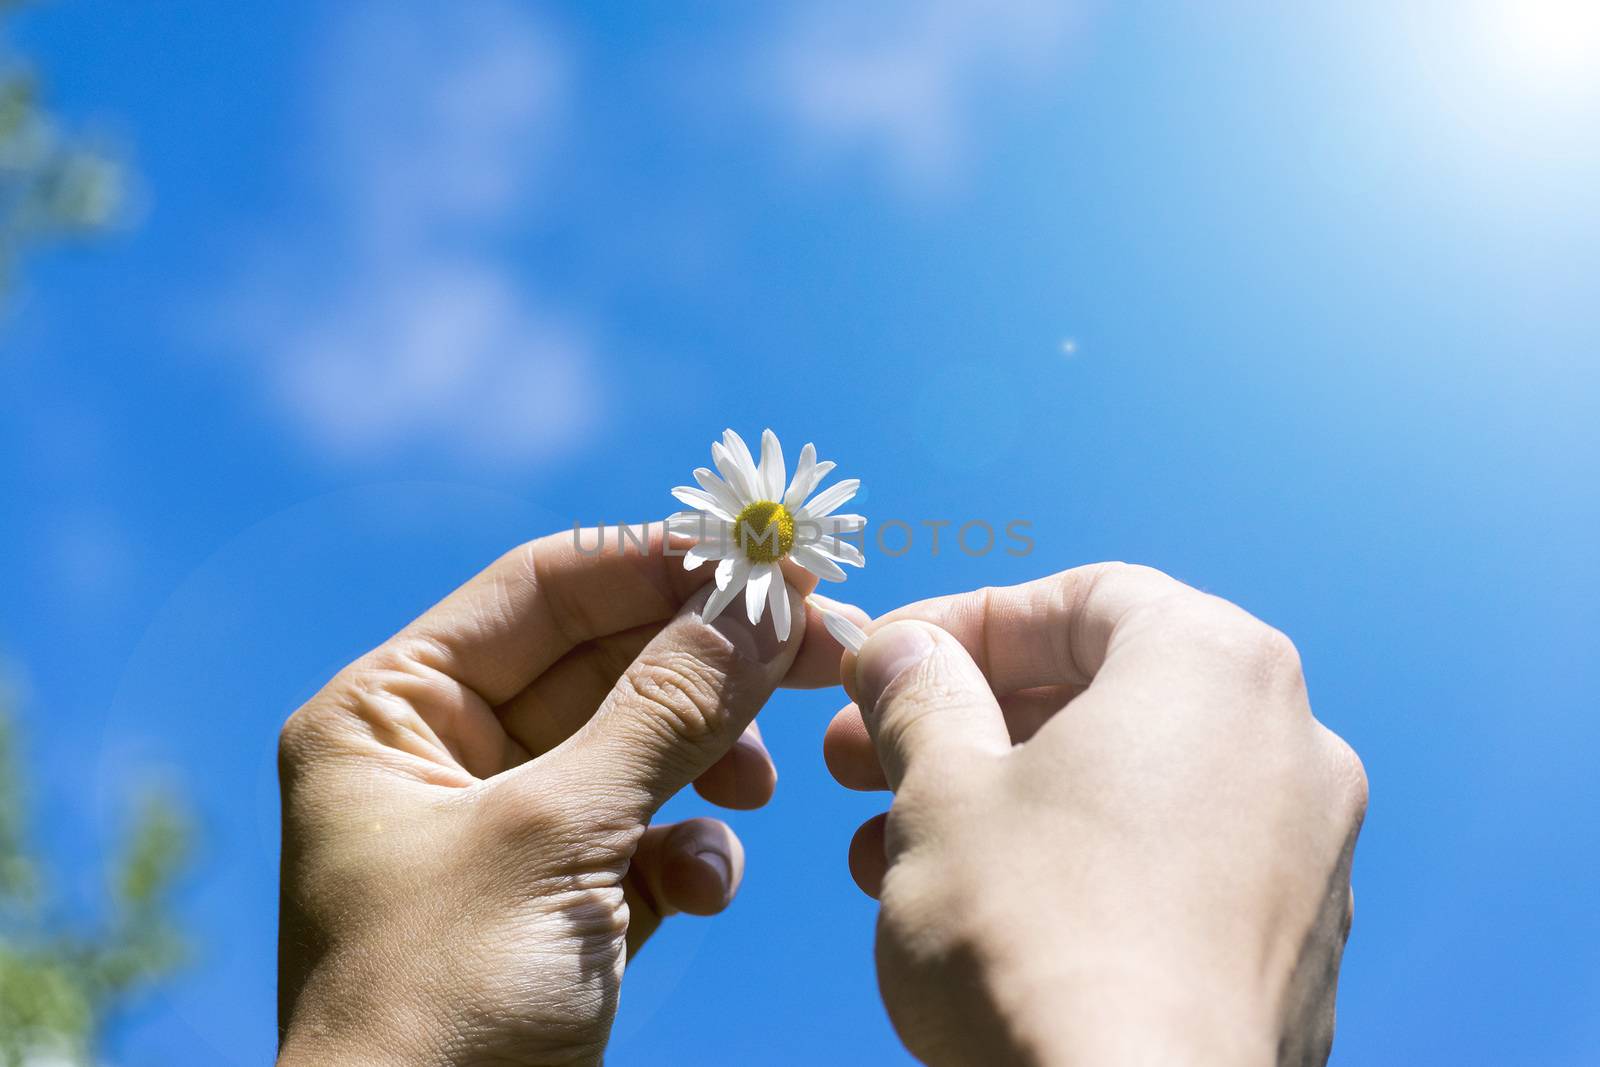 A man holding a Daisy in his hands